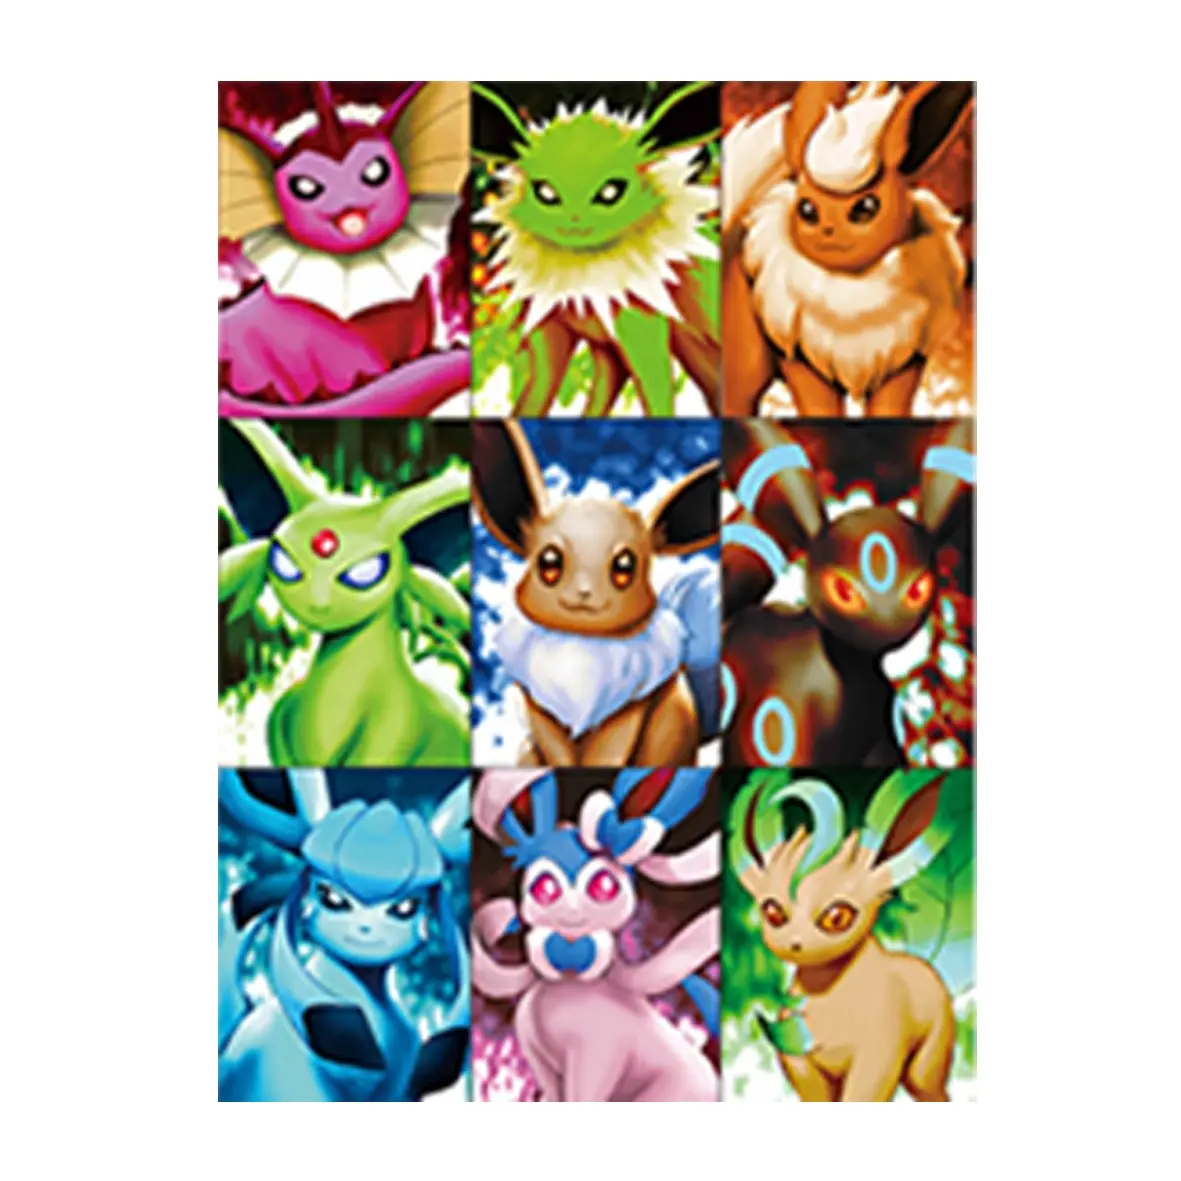 Anime Poster Pocket Monster Canvas Wall Paintings Live Room Poster Wall Decor Home Decoration Painting